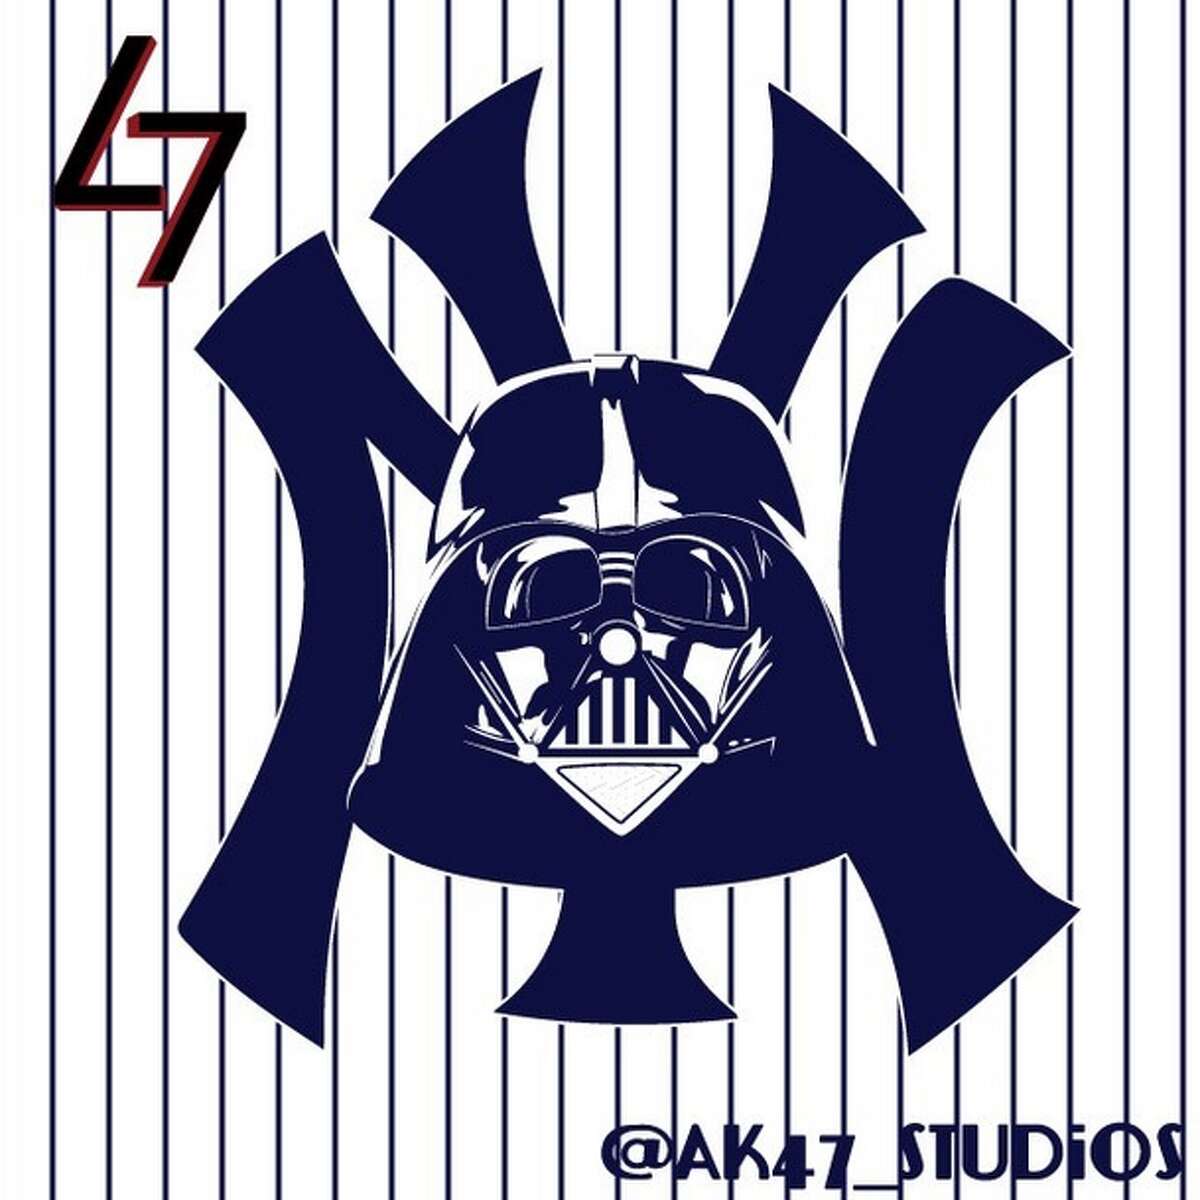 The Force is strong with graphic designer Mark Avery-Kenny, who has knocked it out of the park with this next-level re-imagining of MLB team logos. Take a look at the greatness that occurs when Star Wars meets America's favorite pastime.  The New York Yankees and Darth Vader